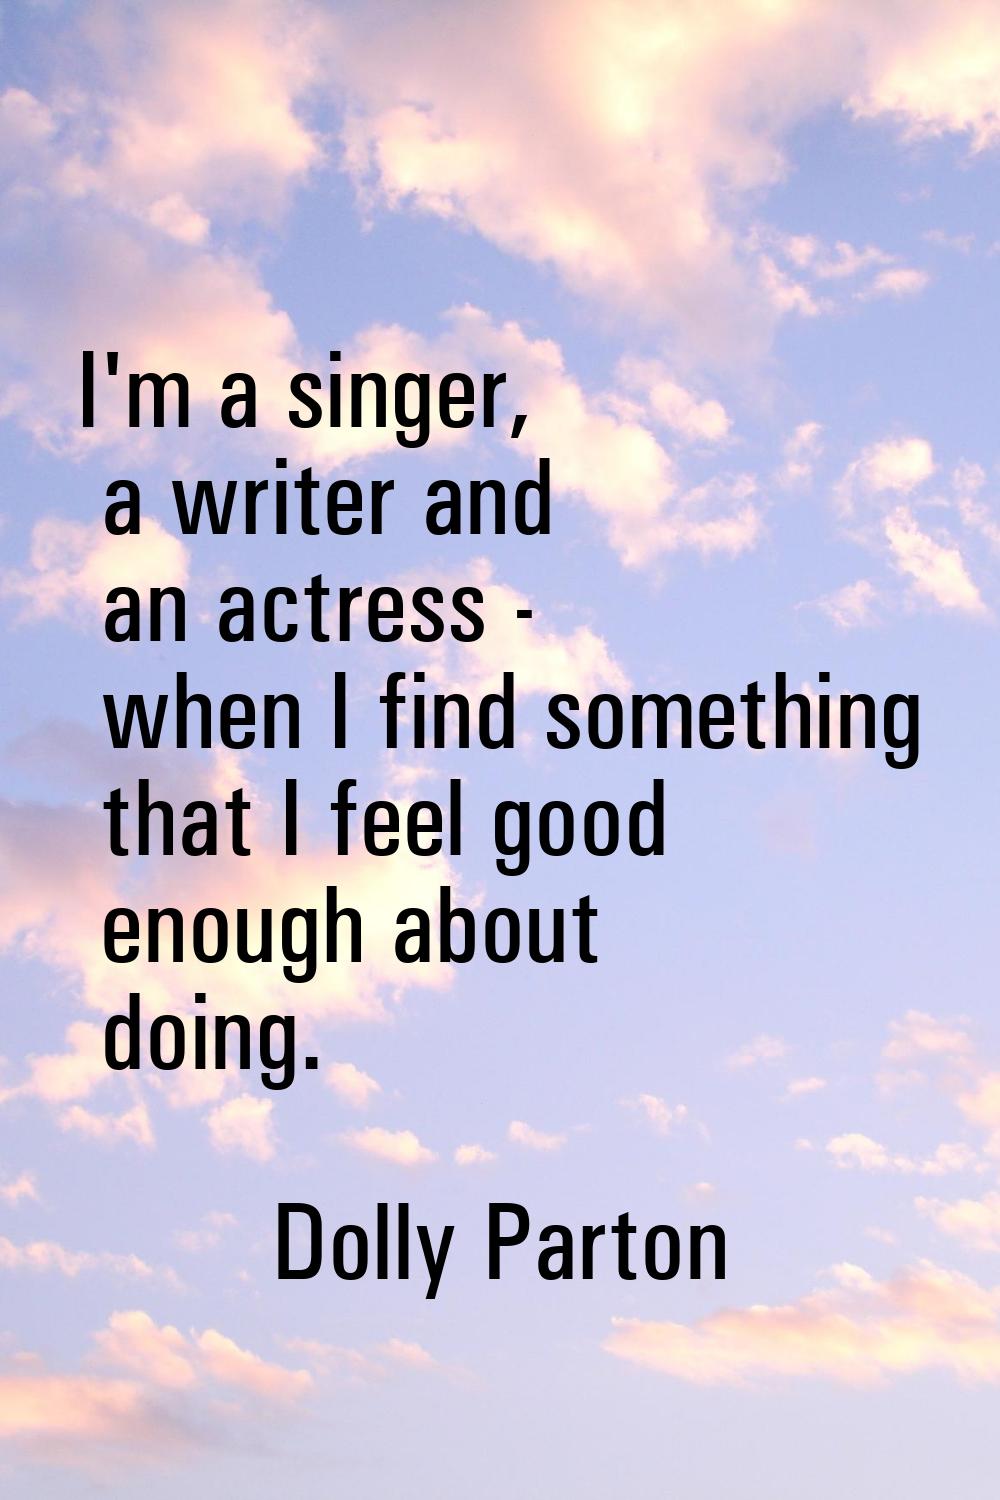 I'm a singer, a writer and an actress - when I find something that I feel good enough about doing.